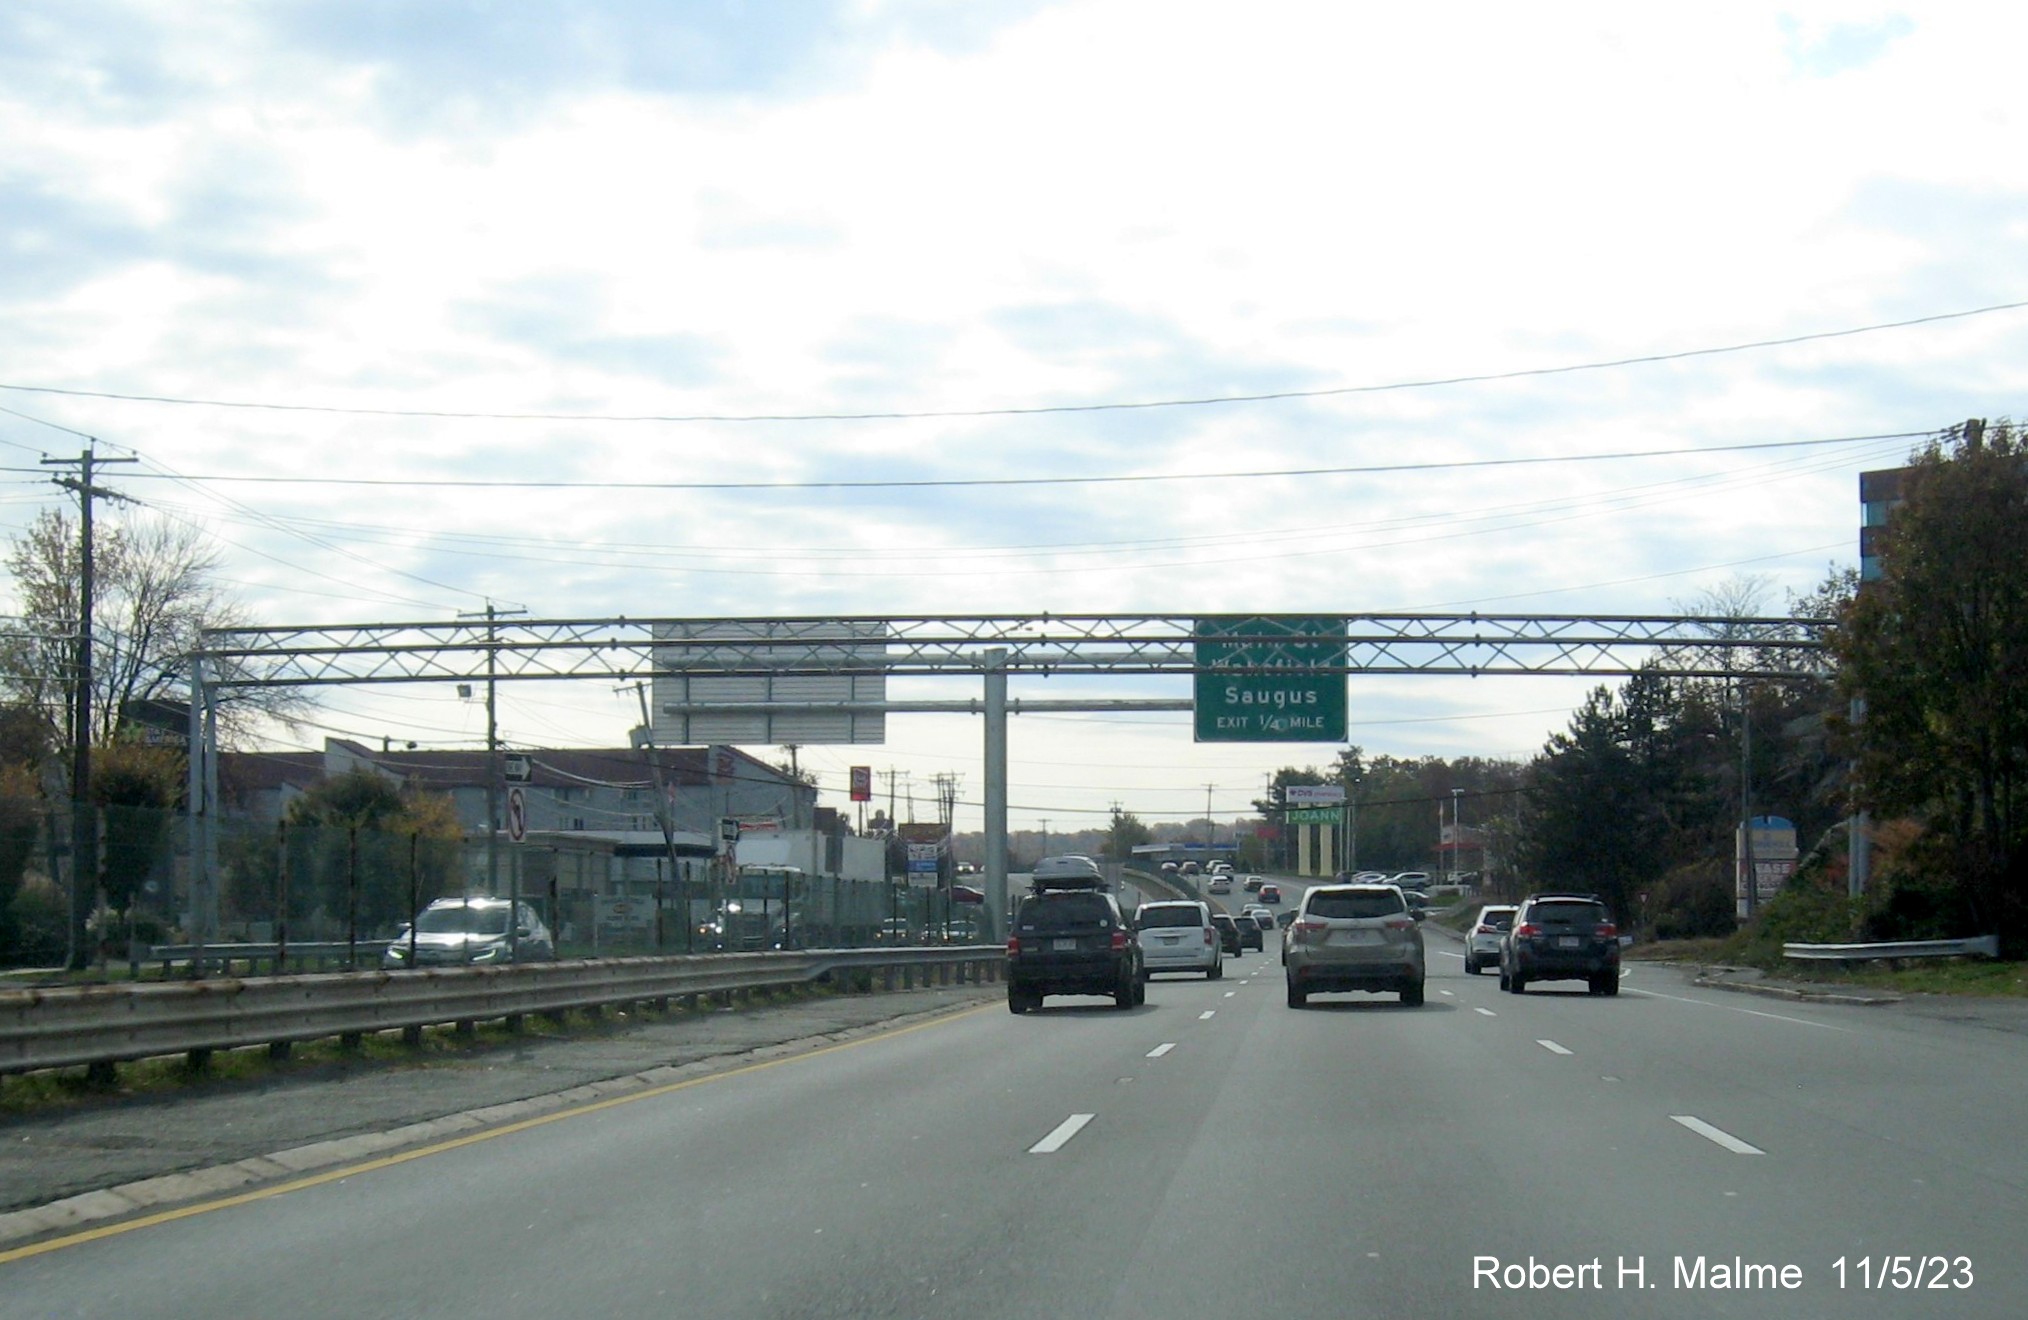 Image of recently placed 1/4 mile advance overhead sign for the Main Street exit on US 1 South in Saugus, November 2023